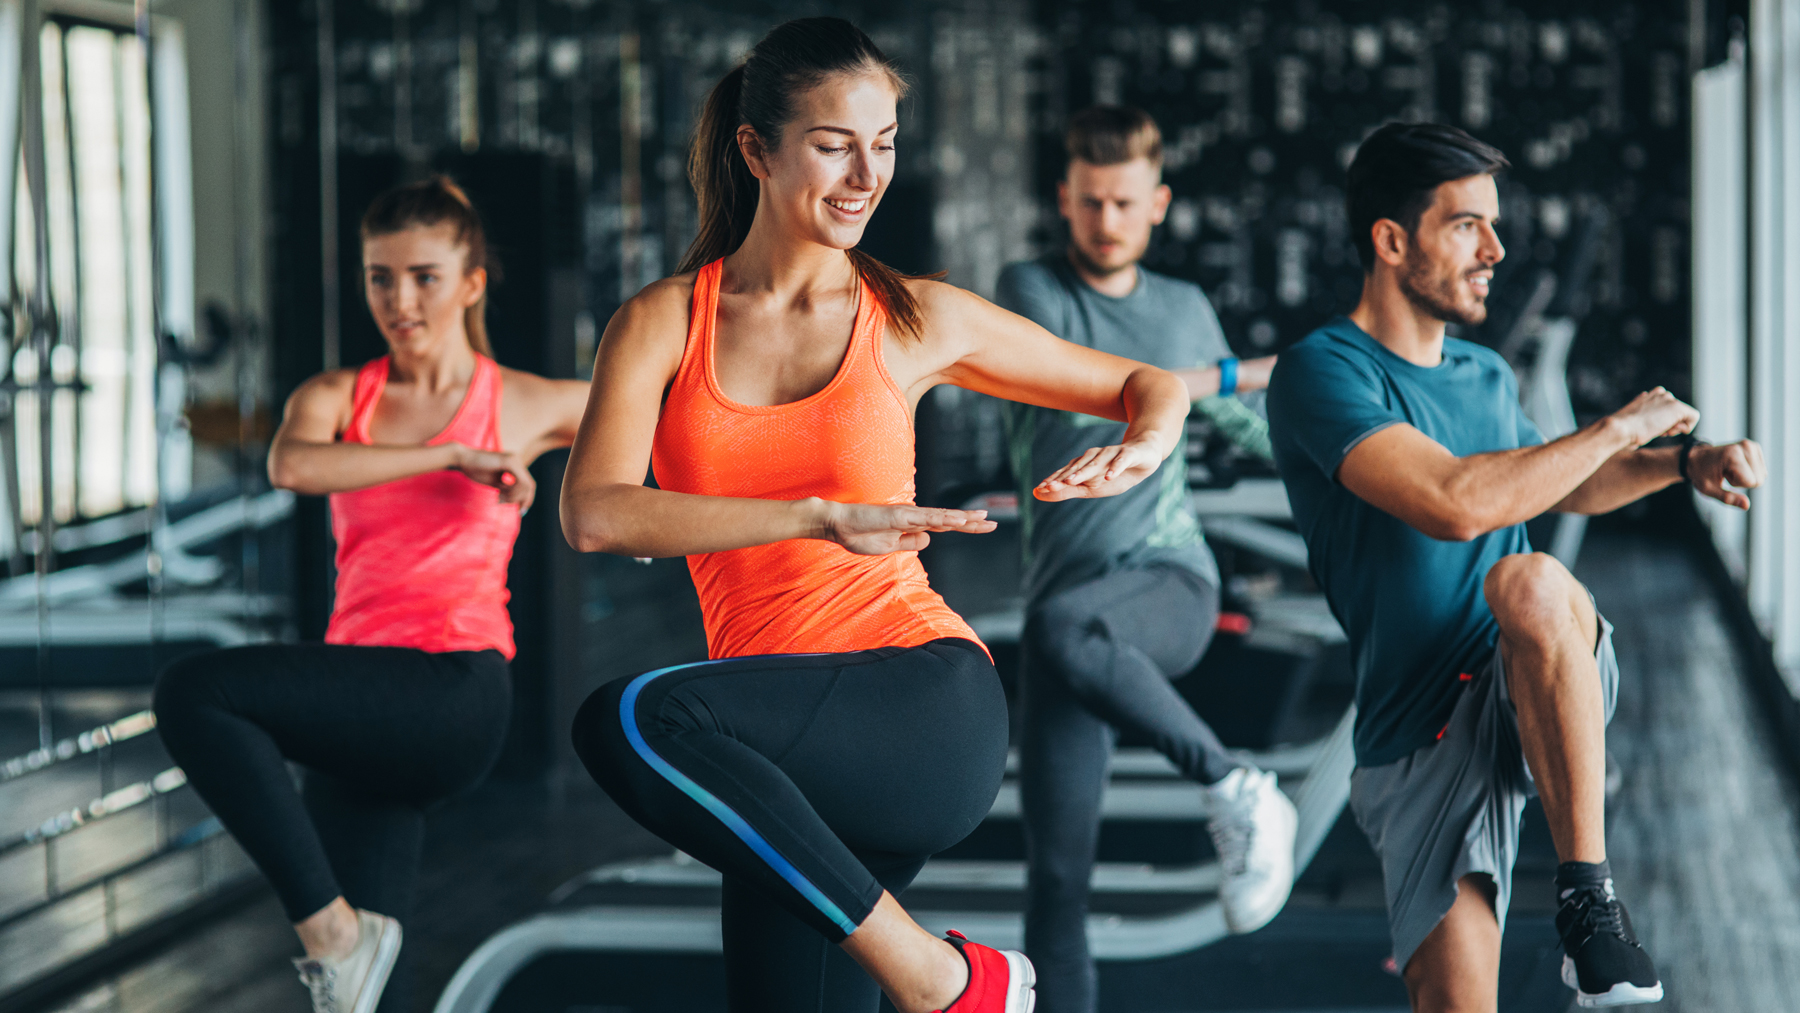 What Are The Differences Between Aerobic And Anaerobic Exercise?